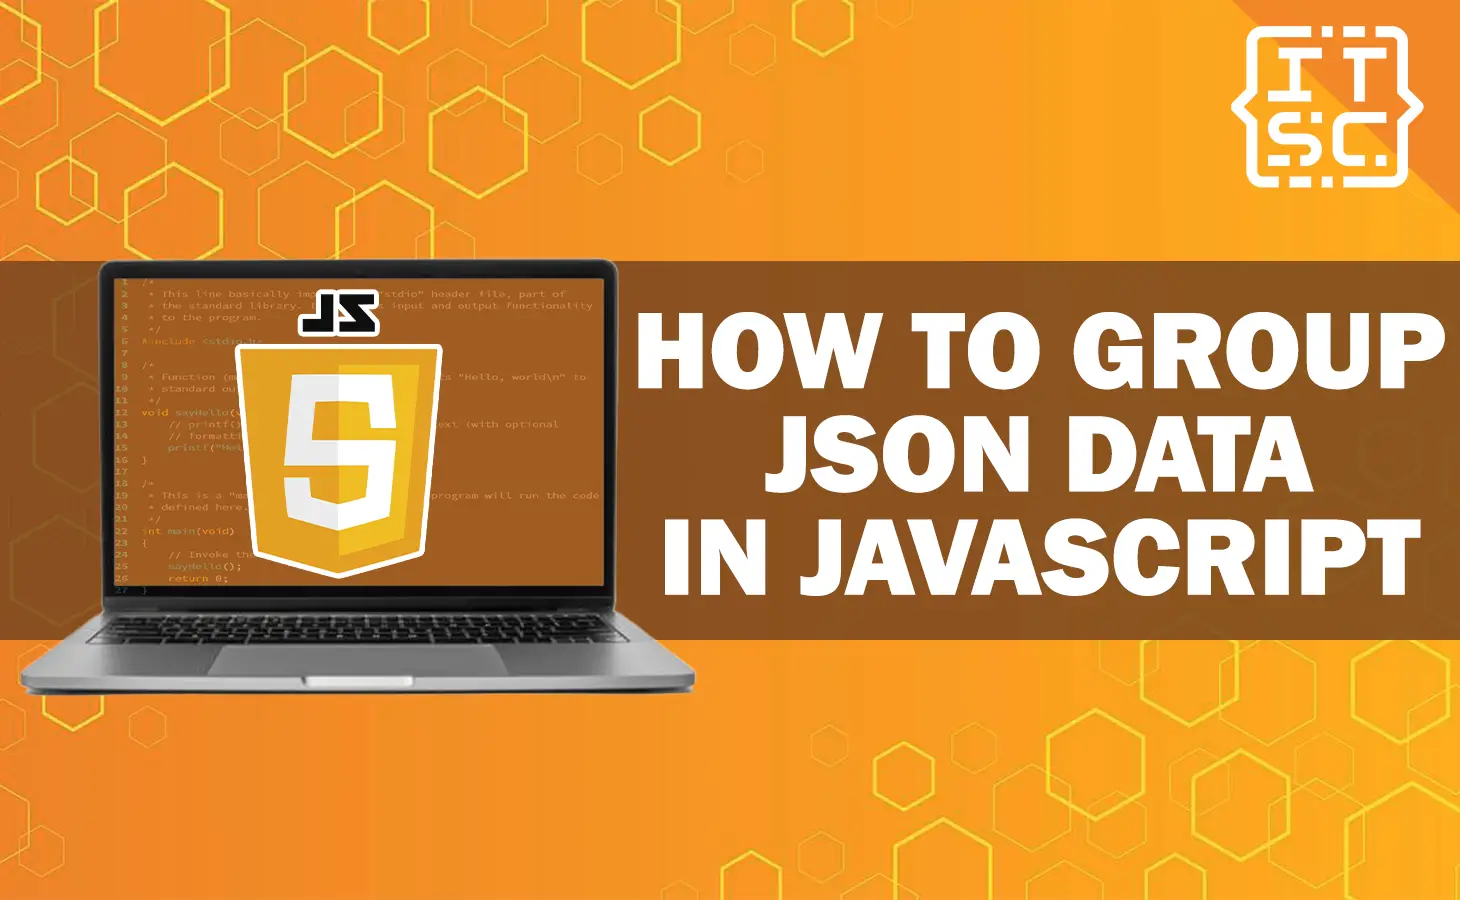 How to group JSON data in JavaScript